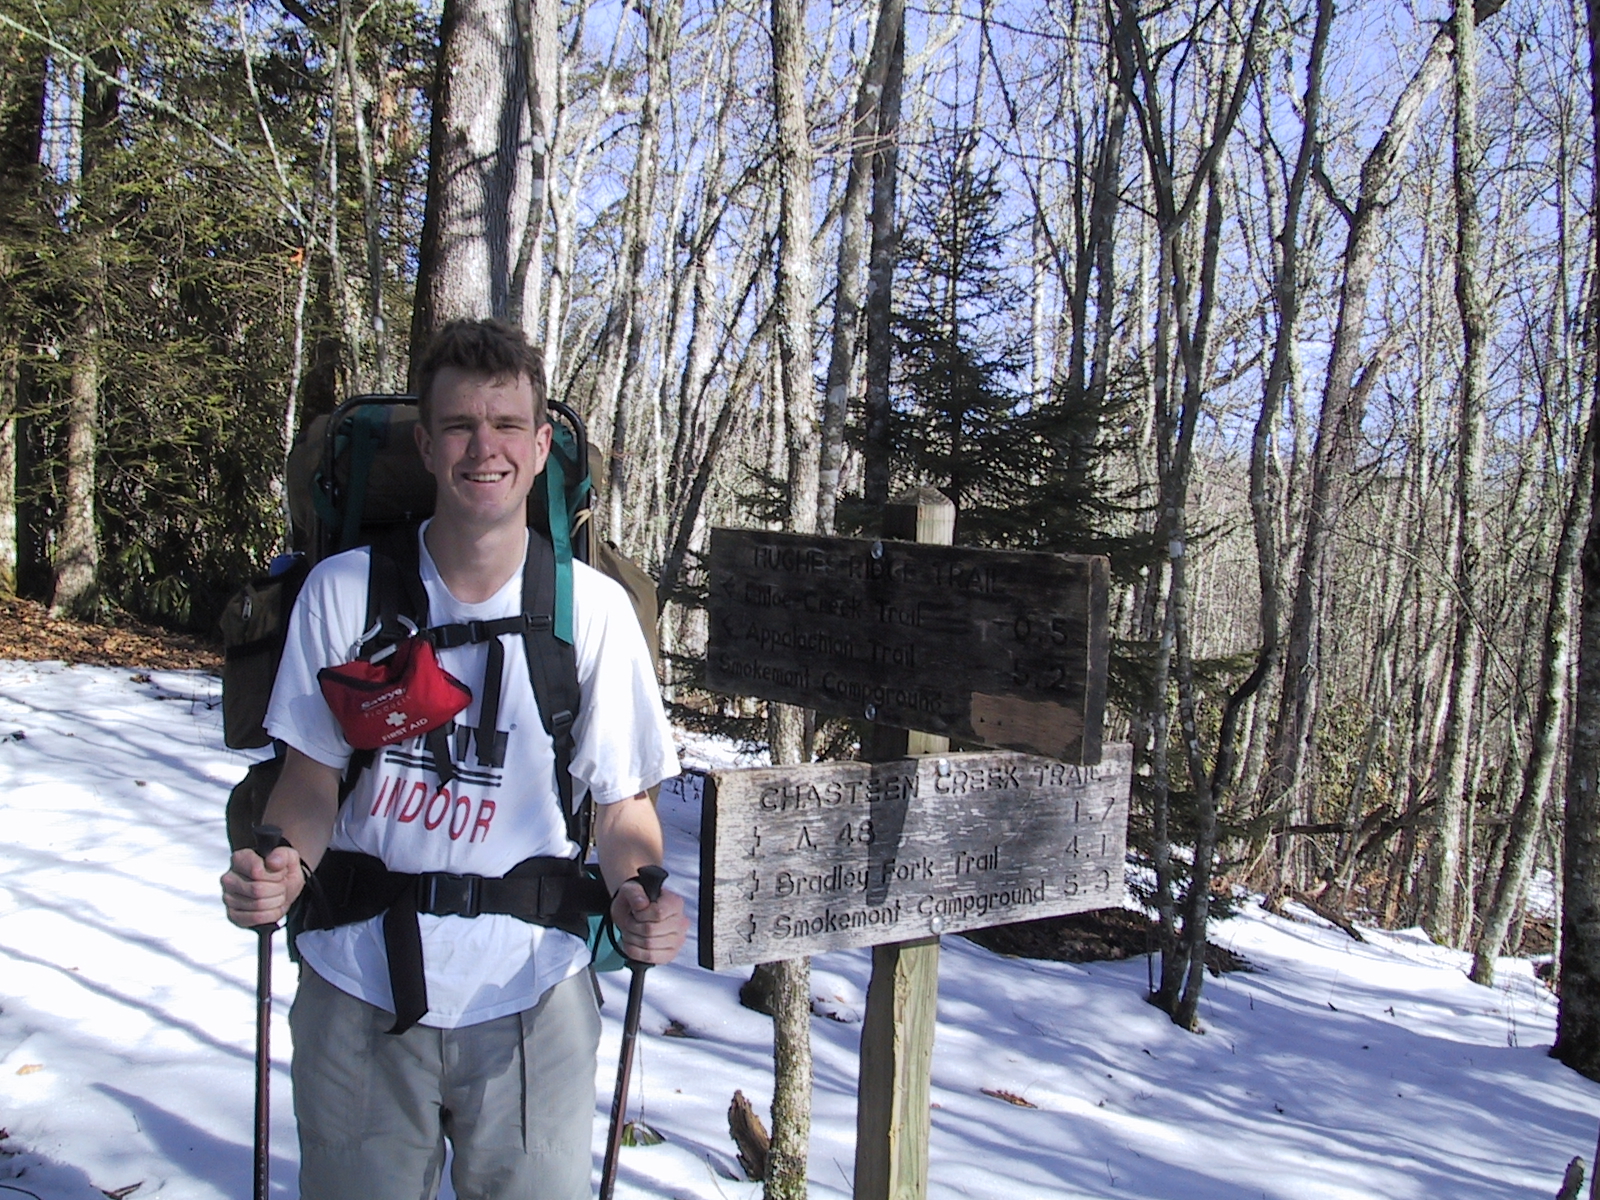 peter at the end of chasteen creek trail